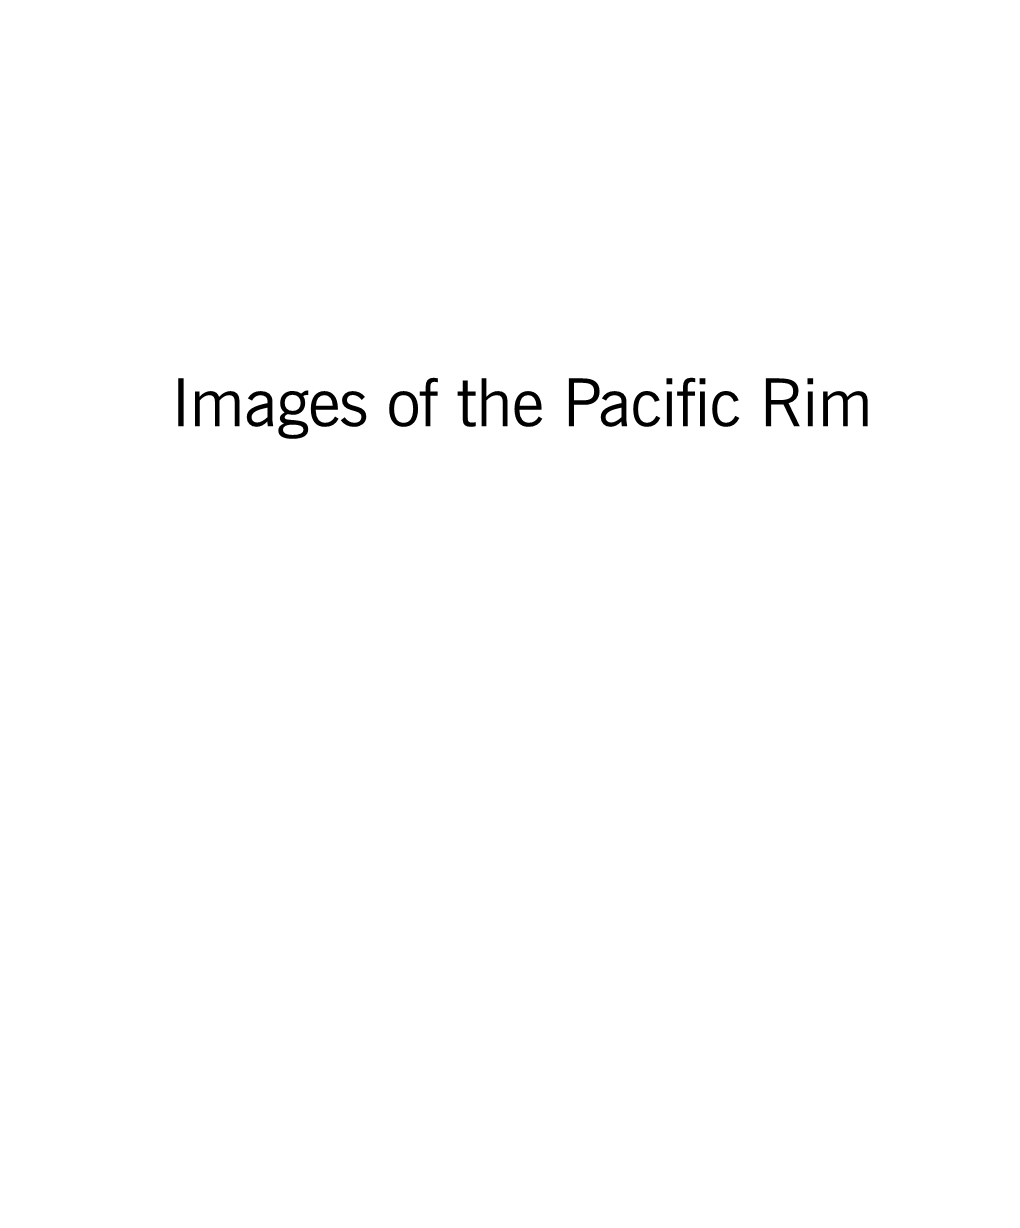 Images of the Pacific Rim